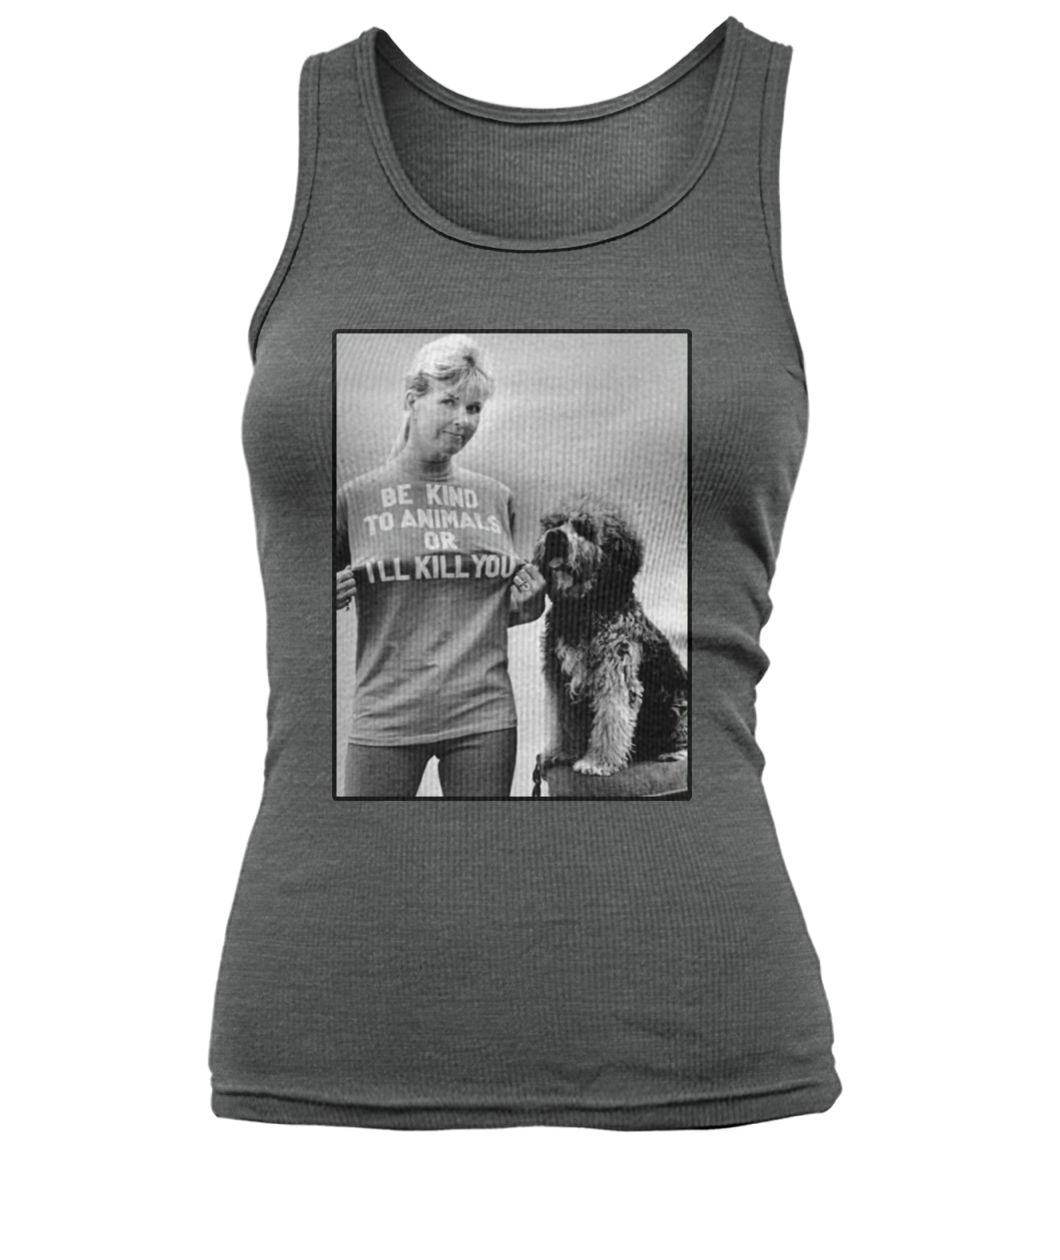 Doris day be kind to animals or I'll kill you women's tank top